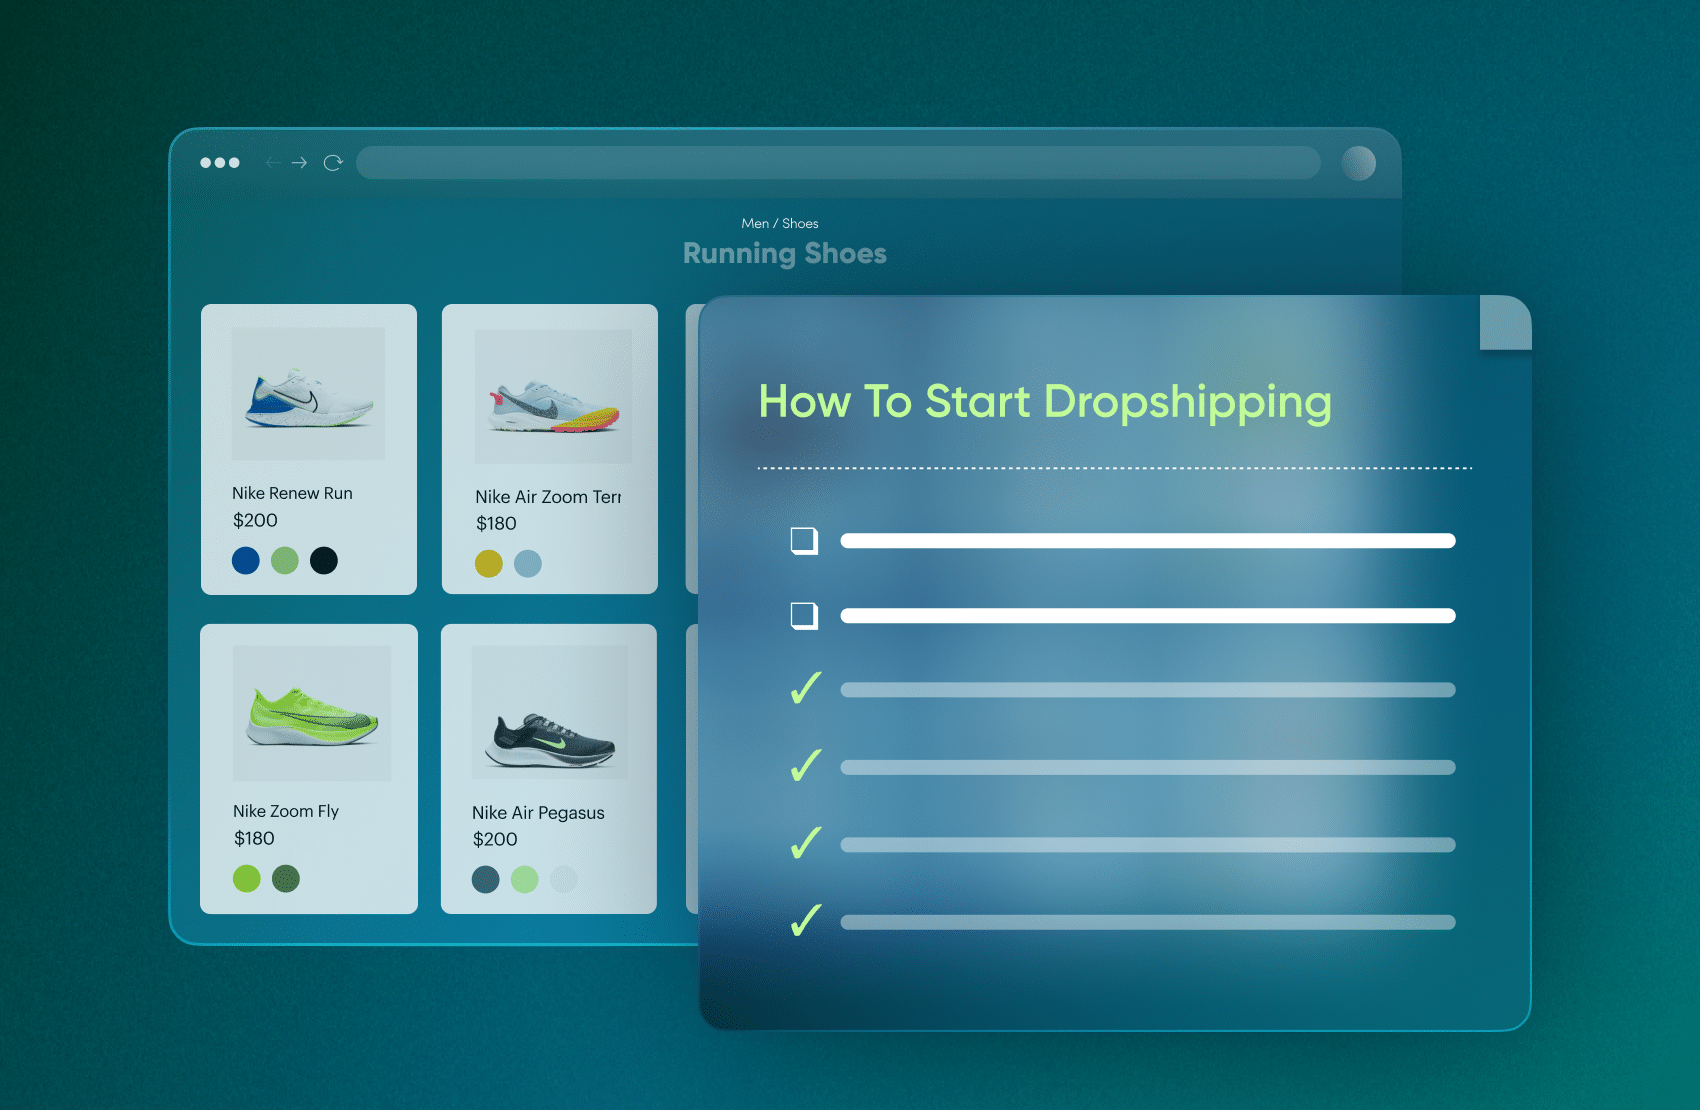 How to Start Dropshipping to Launch an Effective Dropshipping Business